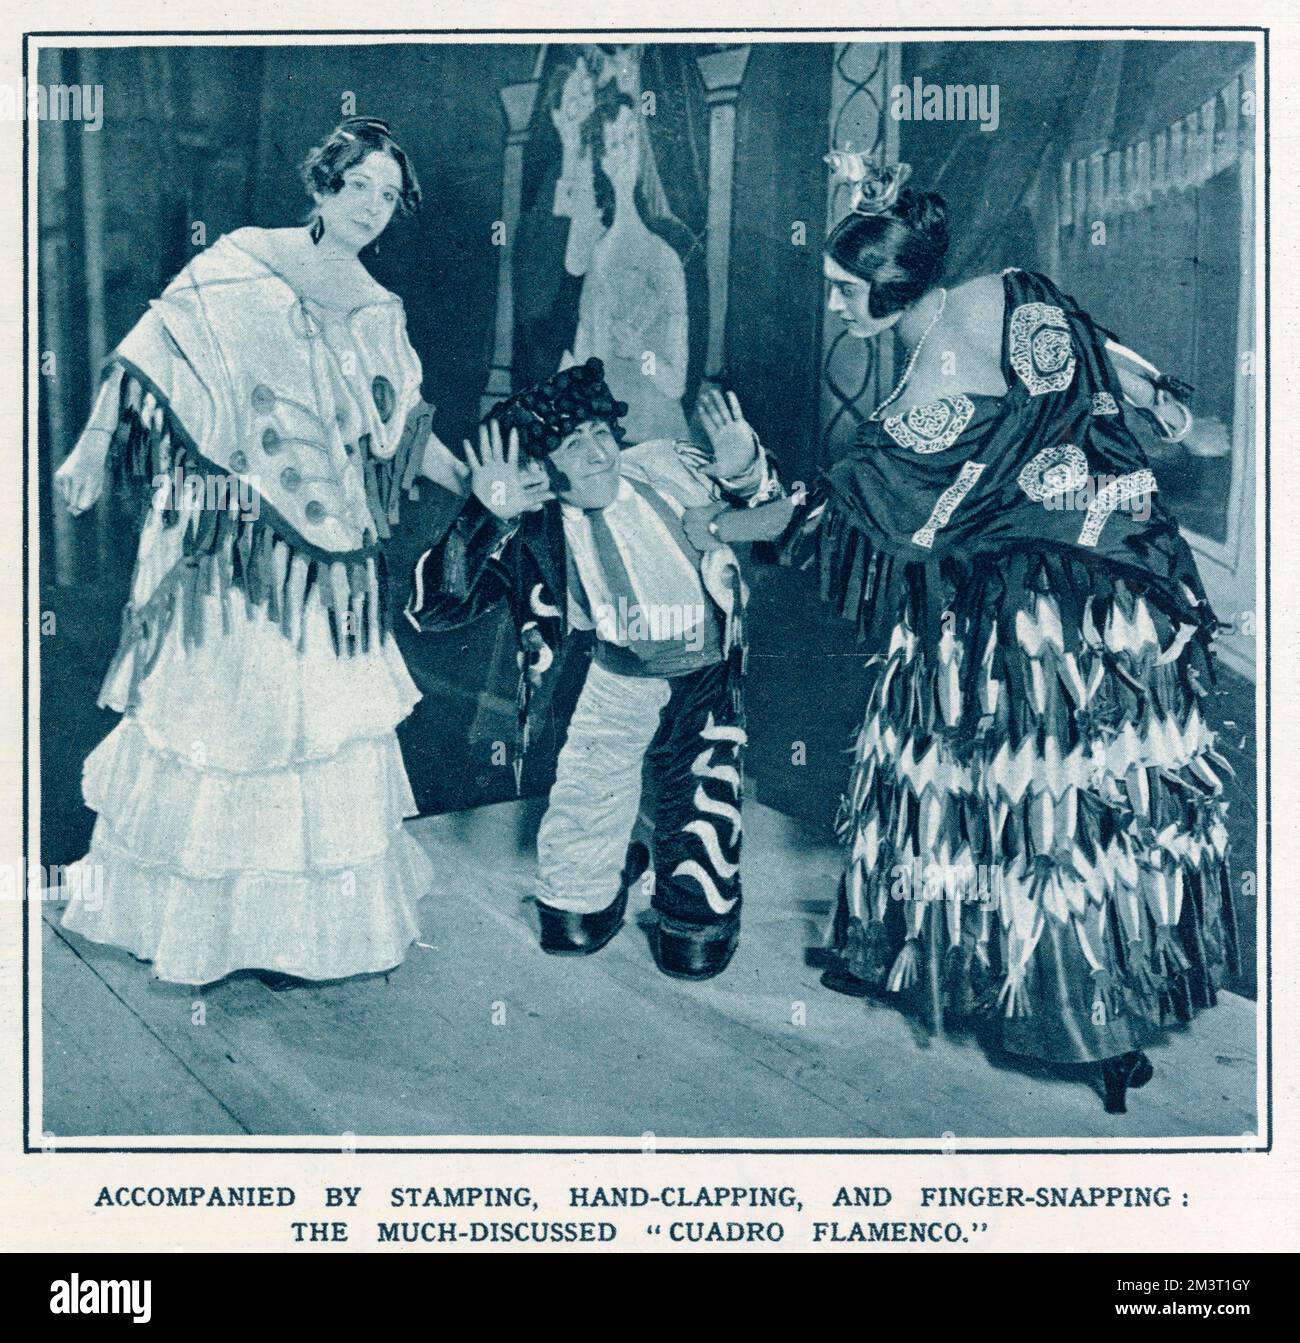 La Rubia de Jerez, Mate y Maria de Albaicin and Mate El Sin Pies performing the 'Cuadro Flamenco', a suite of Andalusian dances which form a key part of Diaghilev's Ballets Russes performance at Prince's Theatre, London. The scenery and costumes were designed by Pablo Picasso. Stock Photo